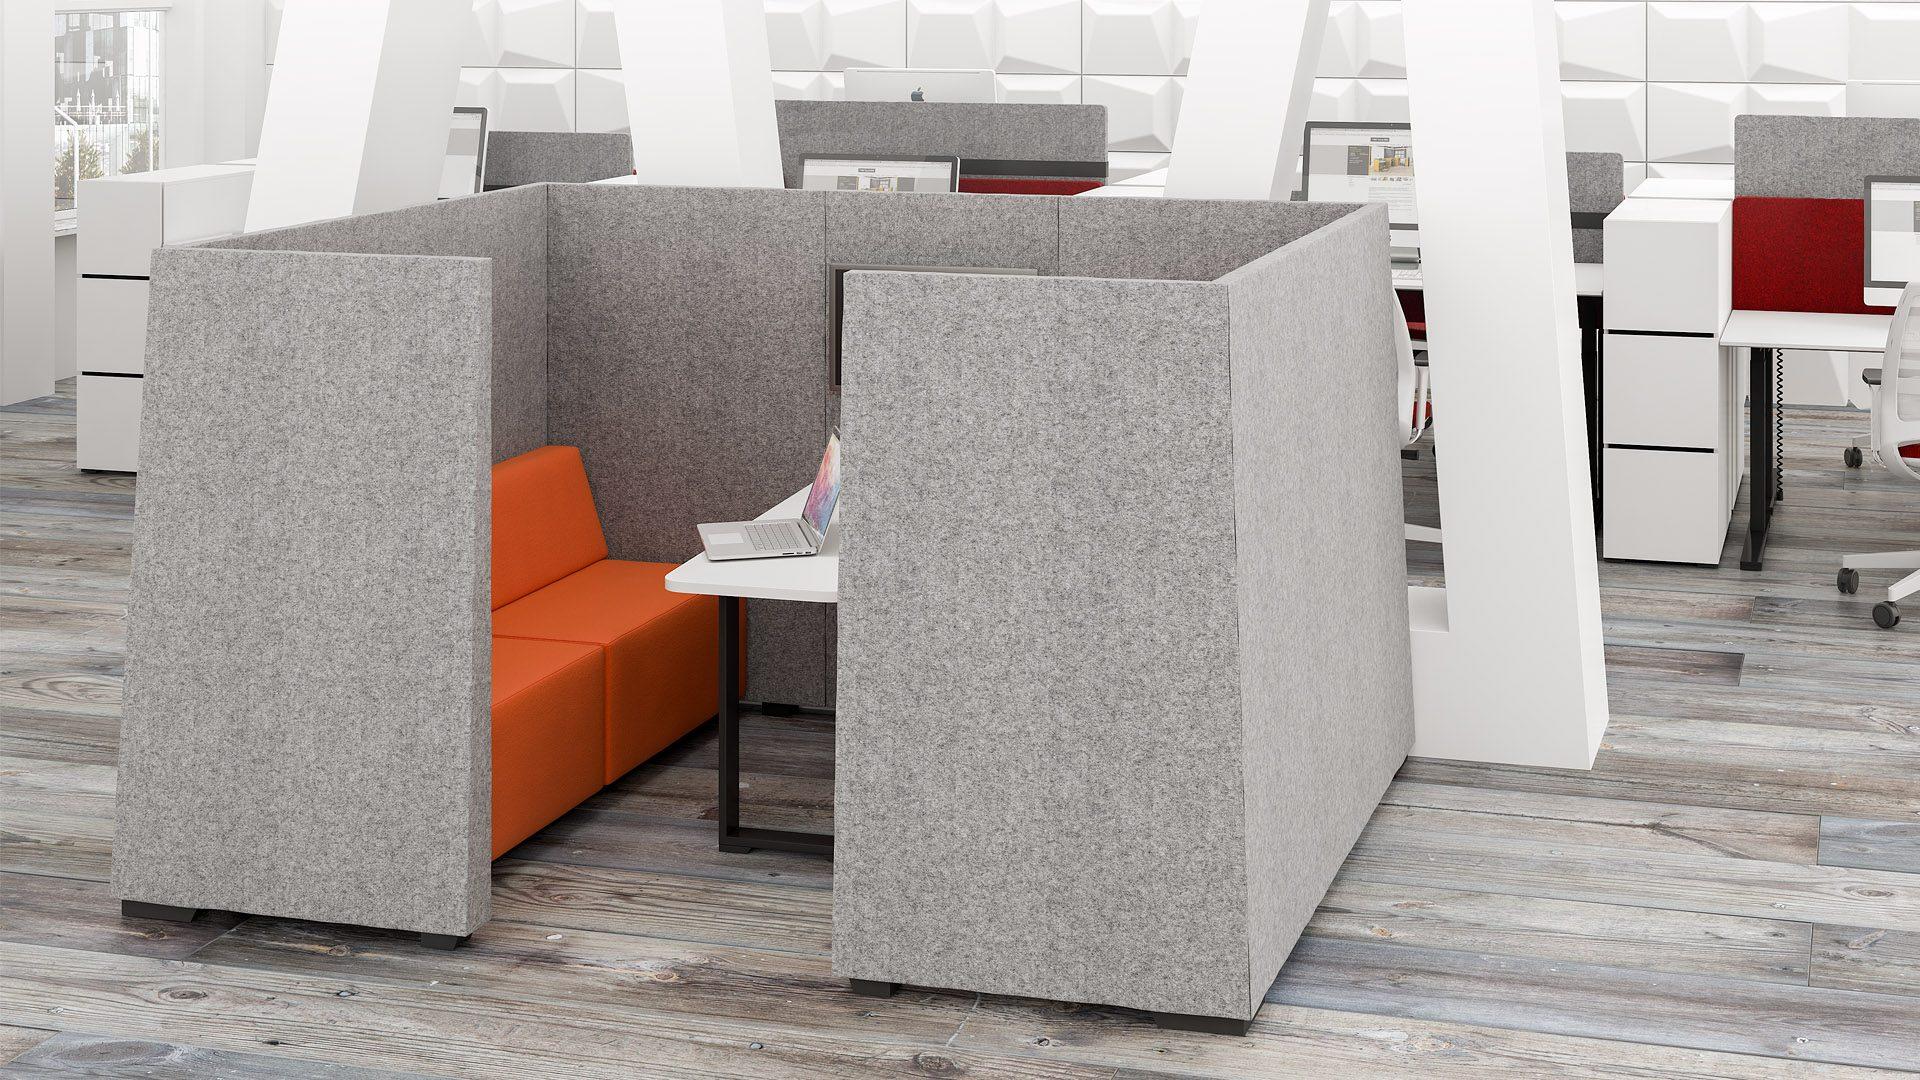 You can choose an acoustic carcass and customise the interior space to suit your office